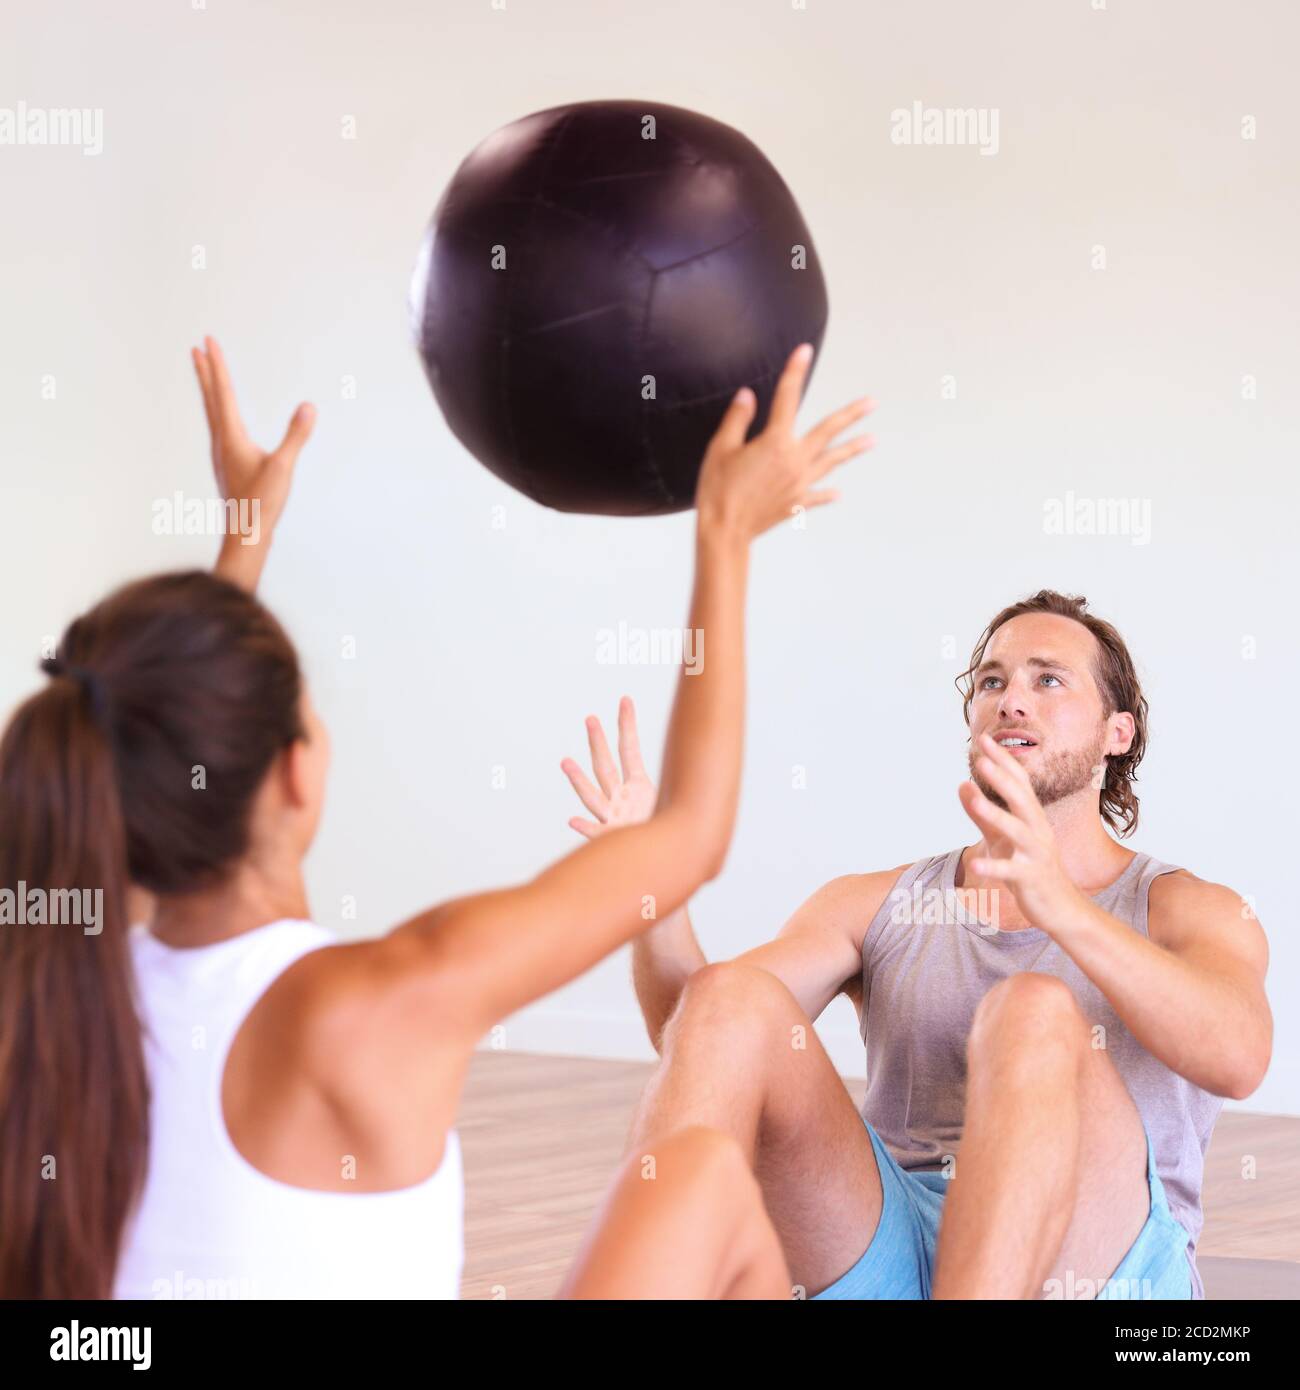 Couple training together at gym. Cross training class at fitness centre, two friends working out throwing medicine ball at each other, sports buddy. Stock Photo